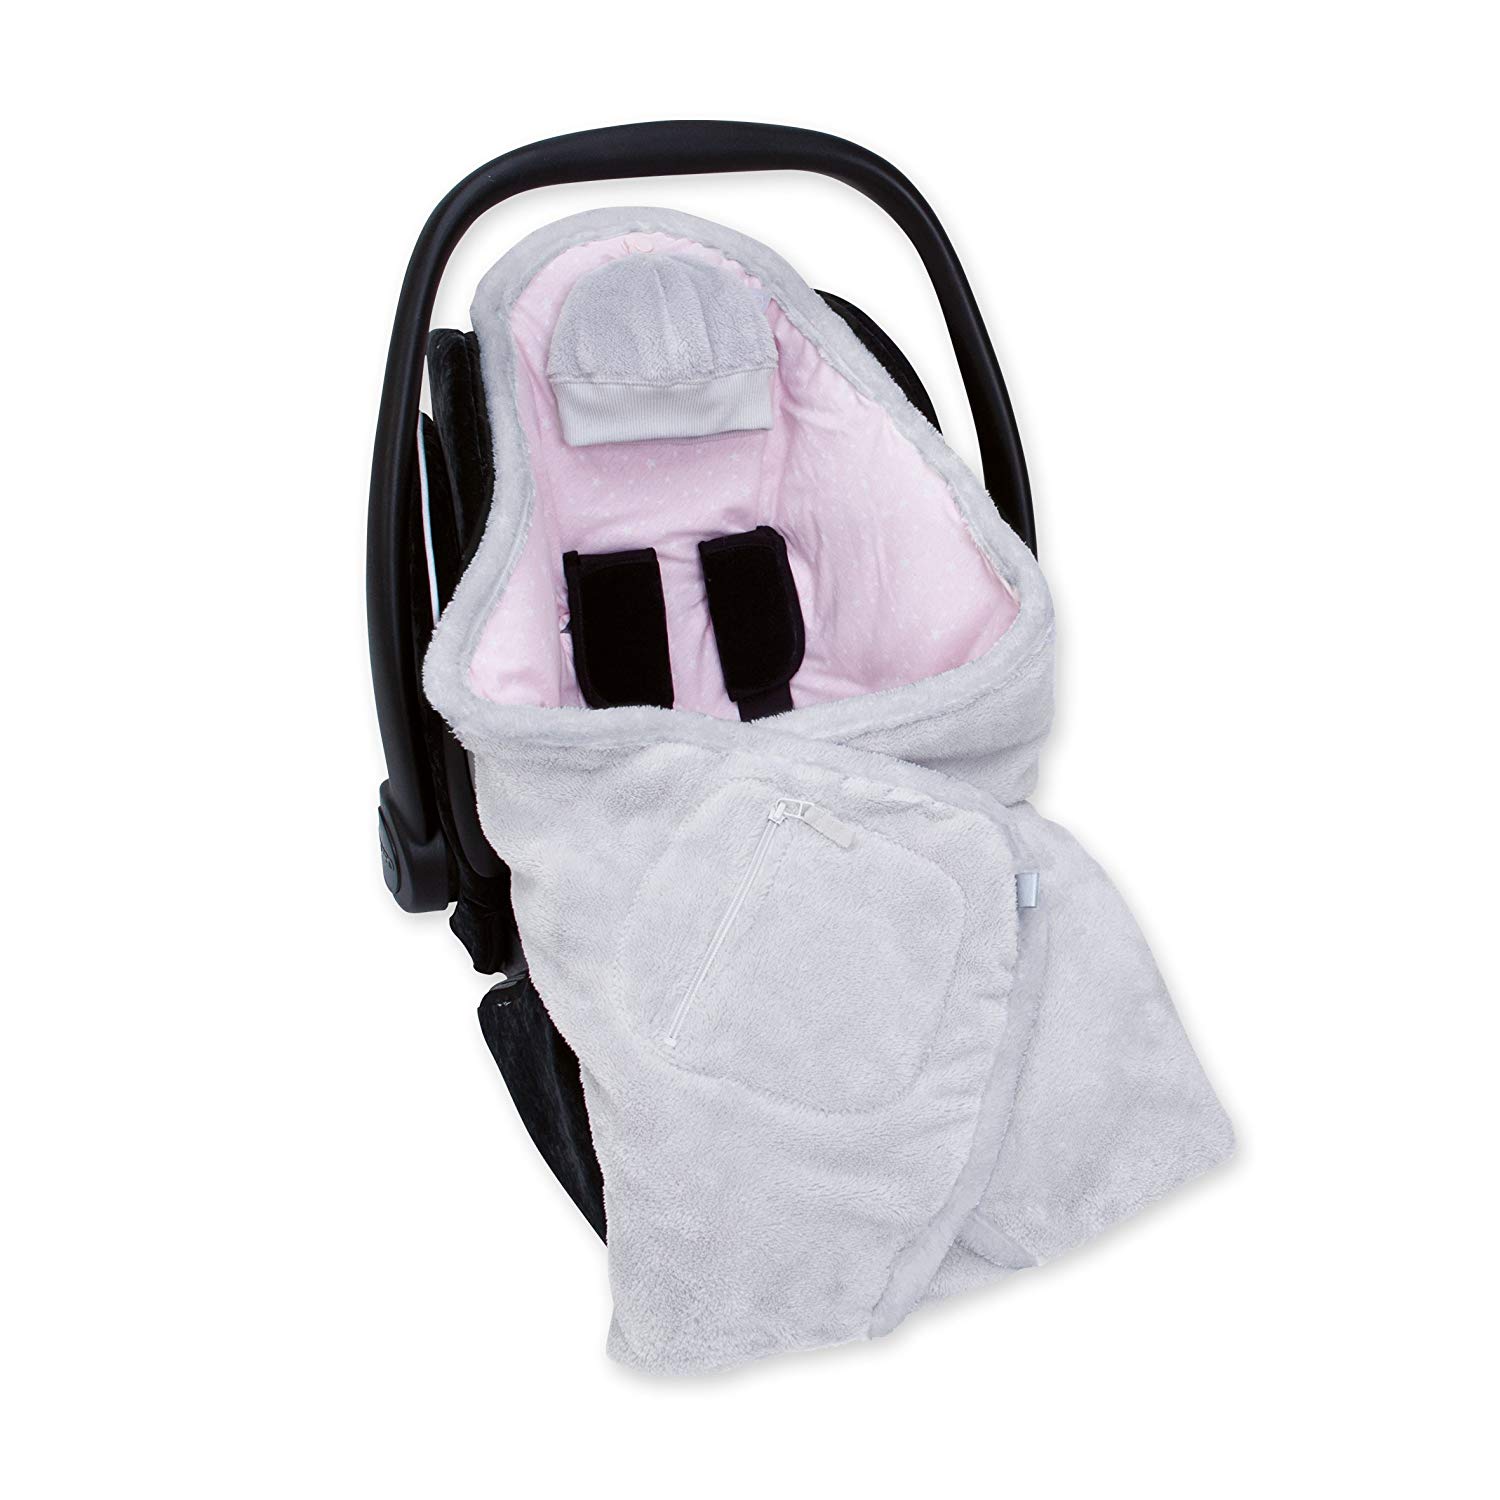 Bemini by Baby Boum 492STARY90SF Biside Softy Jersey Universal Swaddling Blanket for Baby Seat, Car Seat, 90 Plum